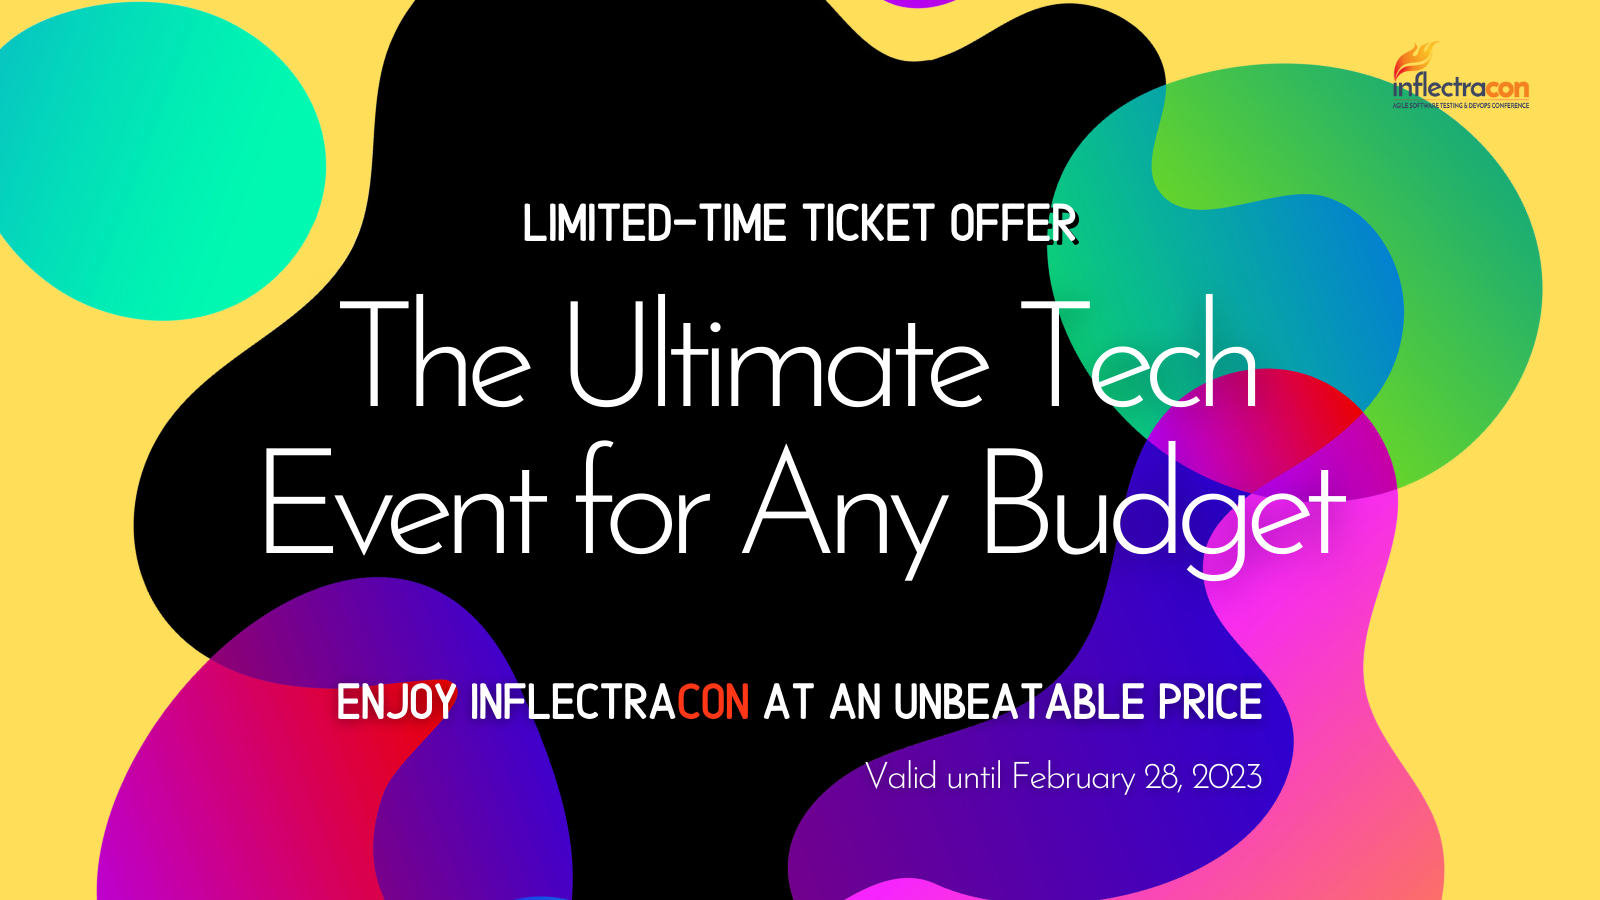 limited-time-ticket-offer-the-ultimate-tech-event-for-any-budget-enjoy-inflectracon-at-at-unbeatable-price-image